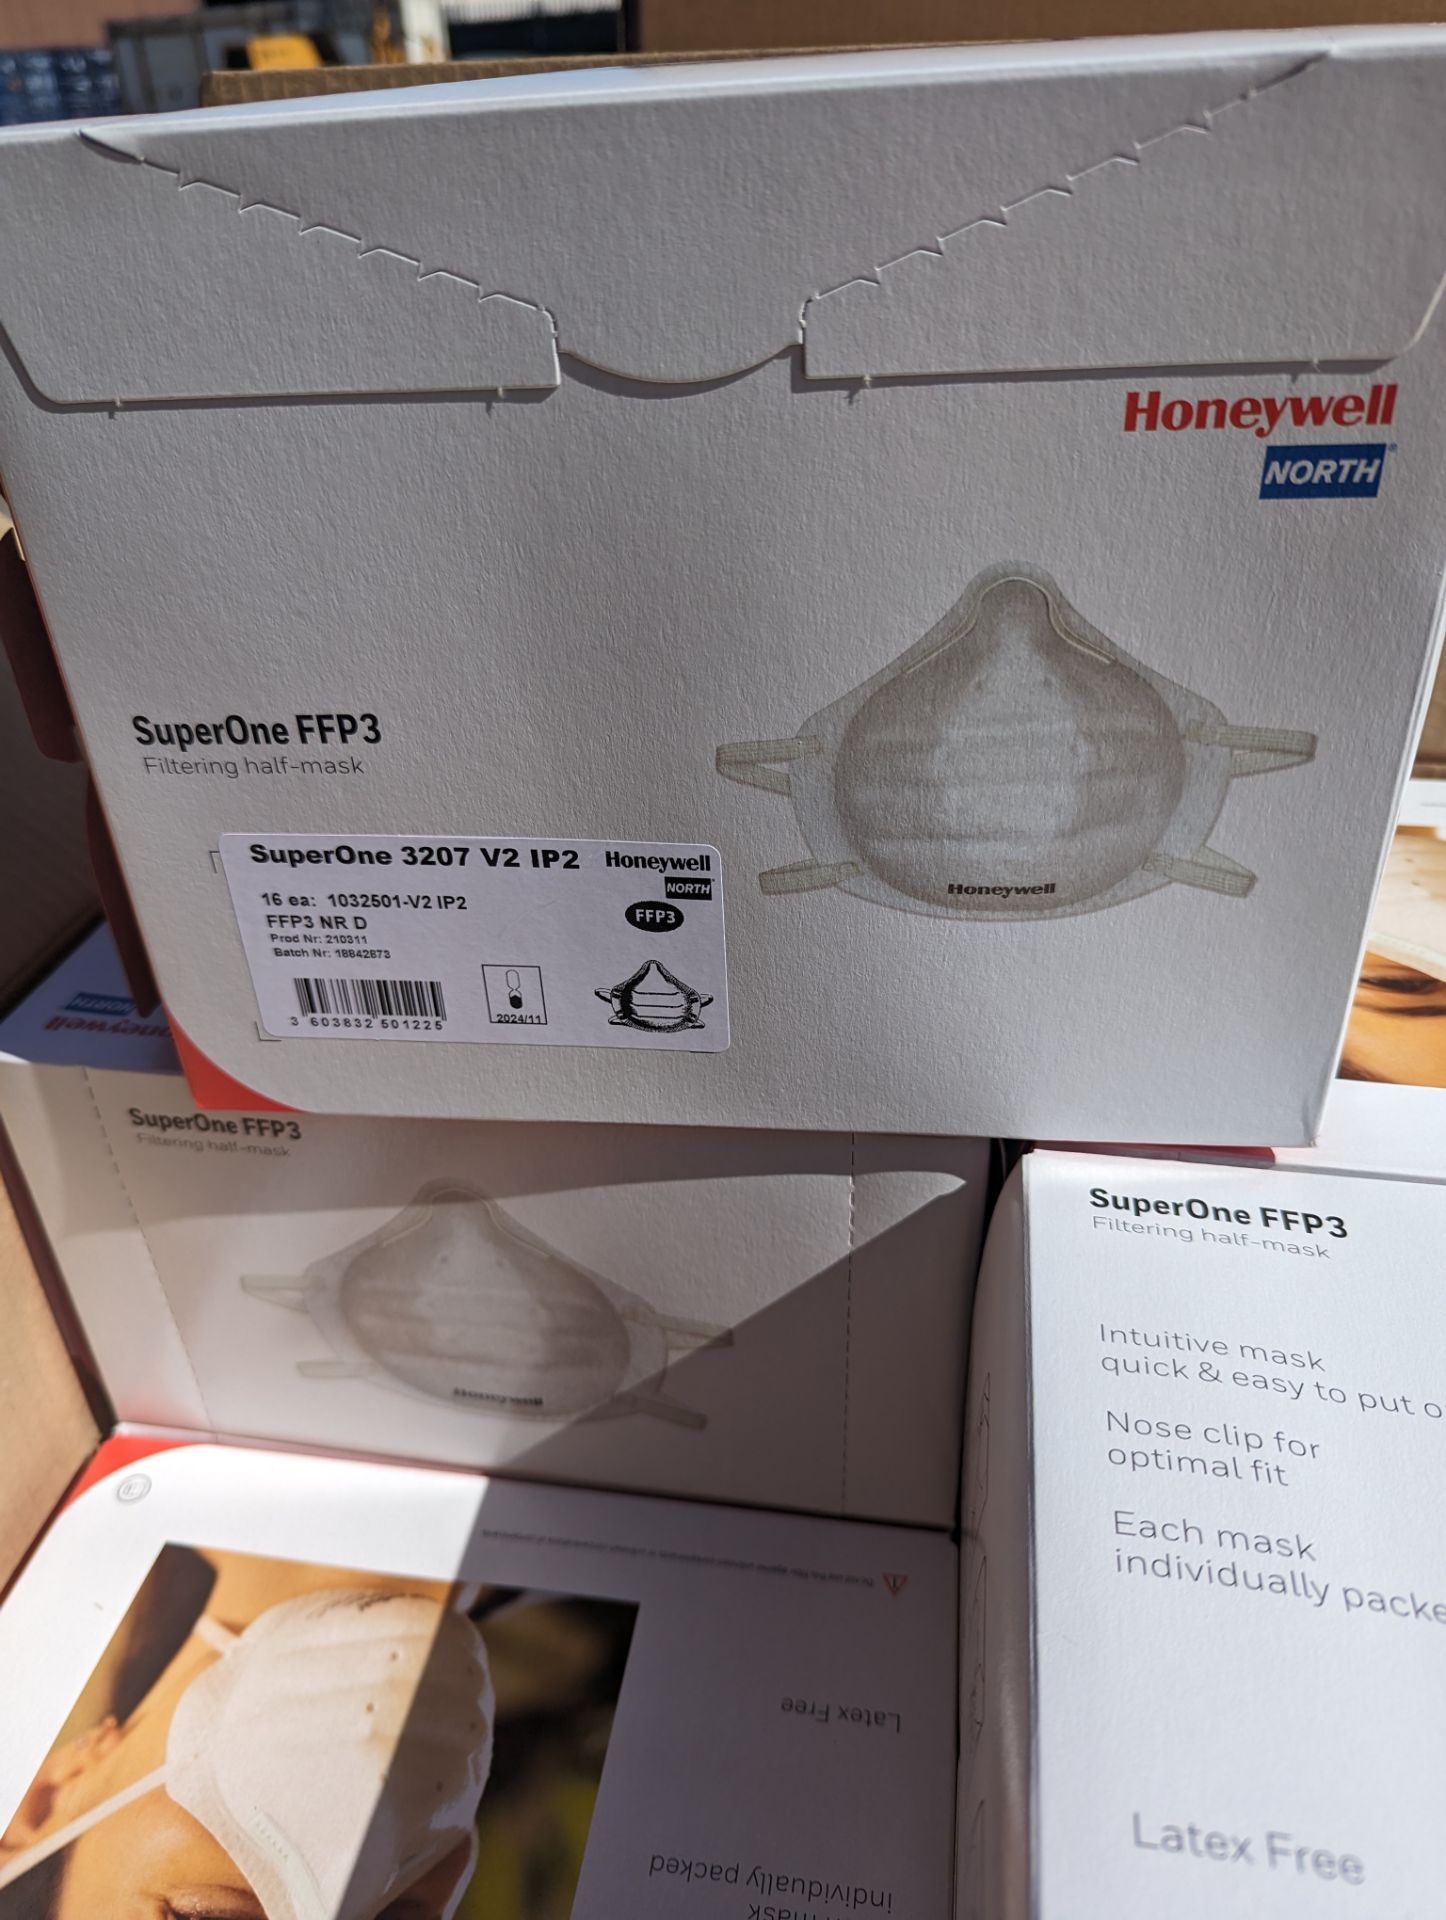 4x Boxes Honeywell SuperOne V2 ip2 FFP3 Half Mask Filter, 12 Packs of 16 Units Each Per Box - Image 5 of 6